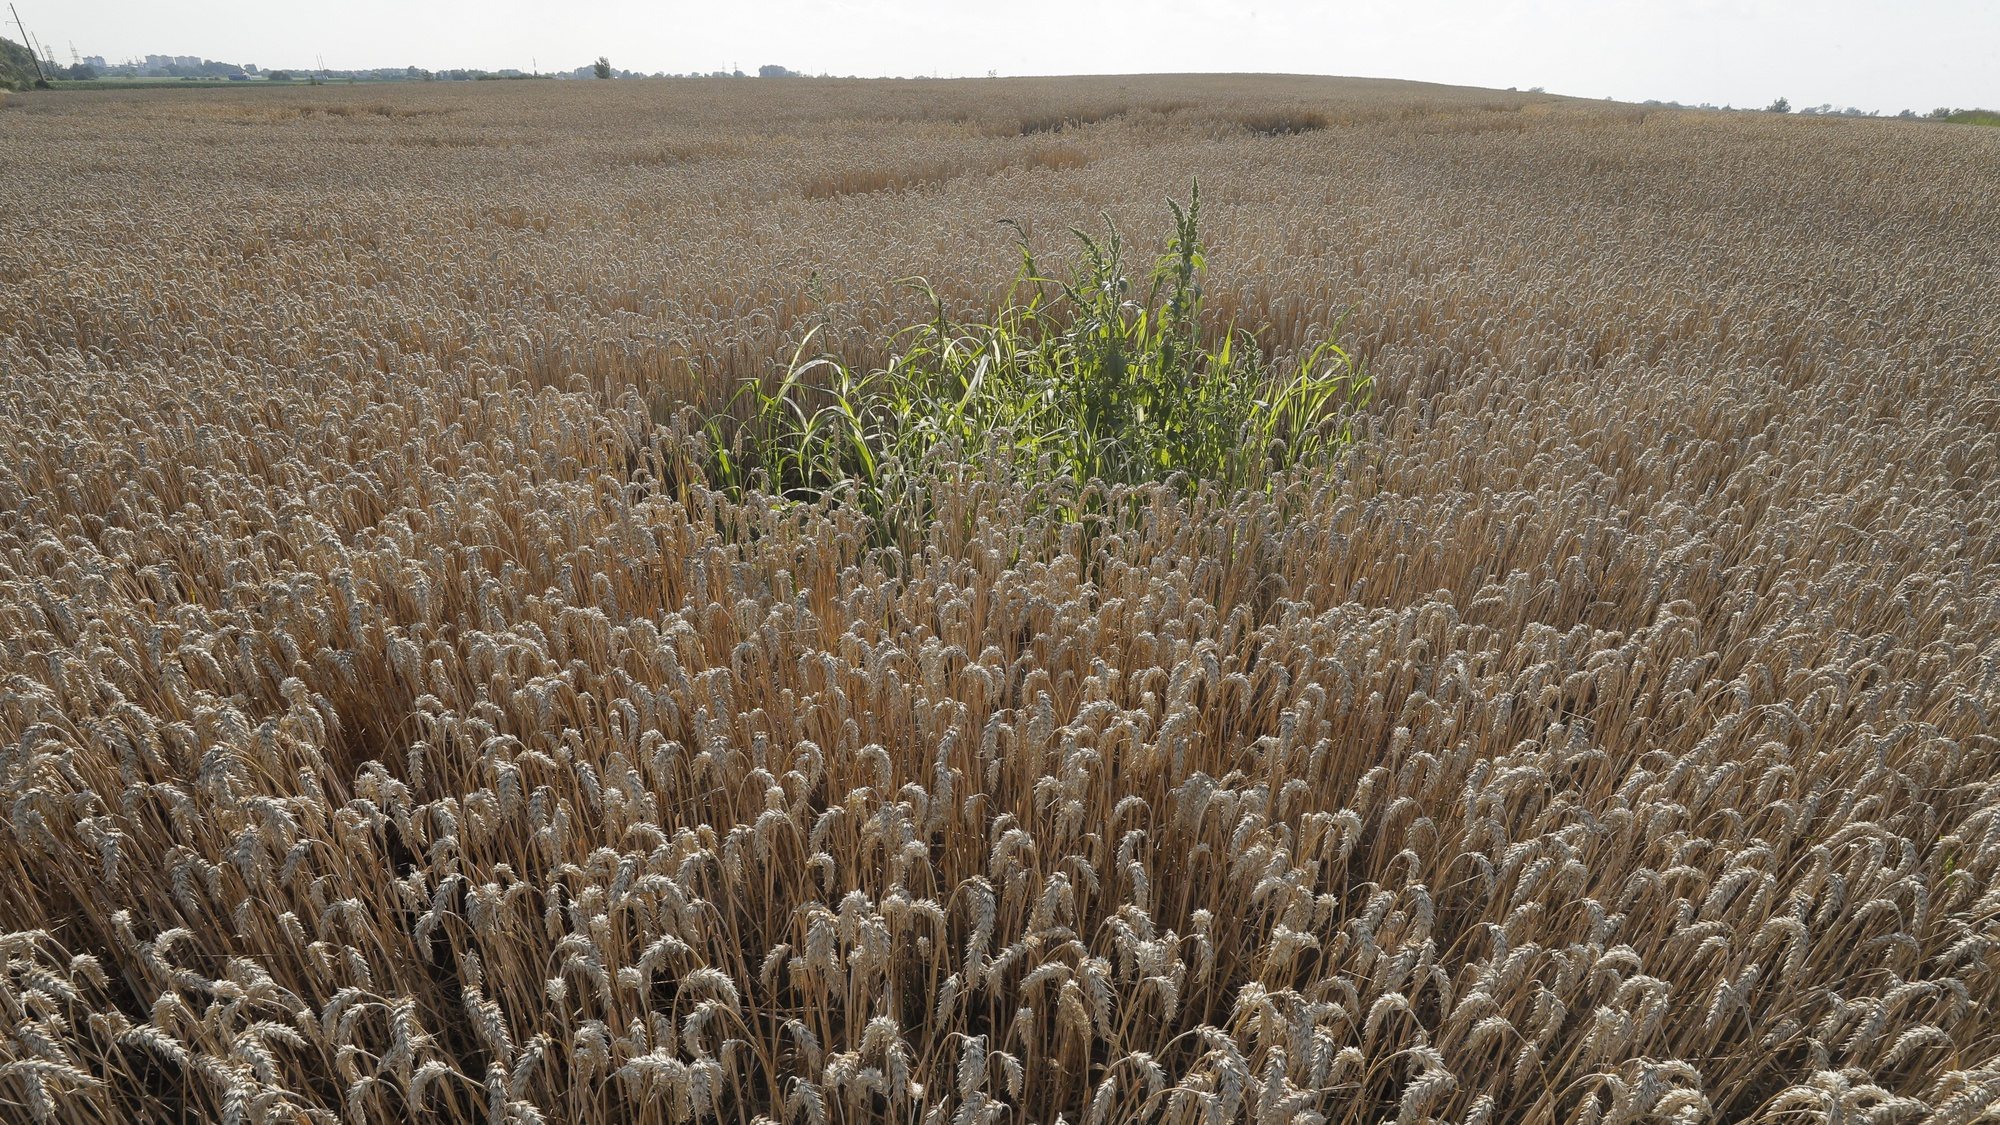 epa10754123 A general view showing a wheat field near Kyiv, Ukraine, 18 July 2023. A deal brokered by Turkey and the United Nations to ensure the safe export of grain from Ukrainian ports expired on 17 July 2023 and Russia withdrew from the deal allowing Ukraine to safely export grain through the Black Sea. The war in Ukraine, which started when Russia entered the country in February 2022, marked in July its 500th day. According to the UN, since the conflict started, more than 9000 civilians have been killed and more than 6 million others are now refugees worldwide.  EPA/SERGEY DOLZHENKO